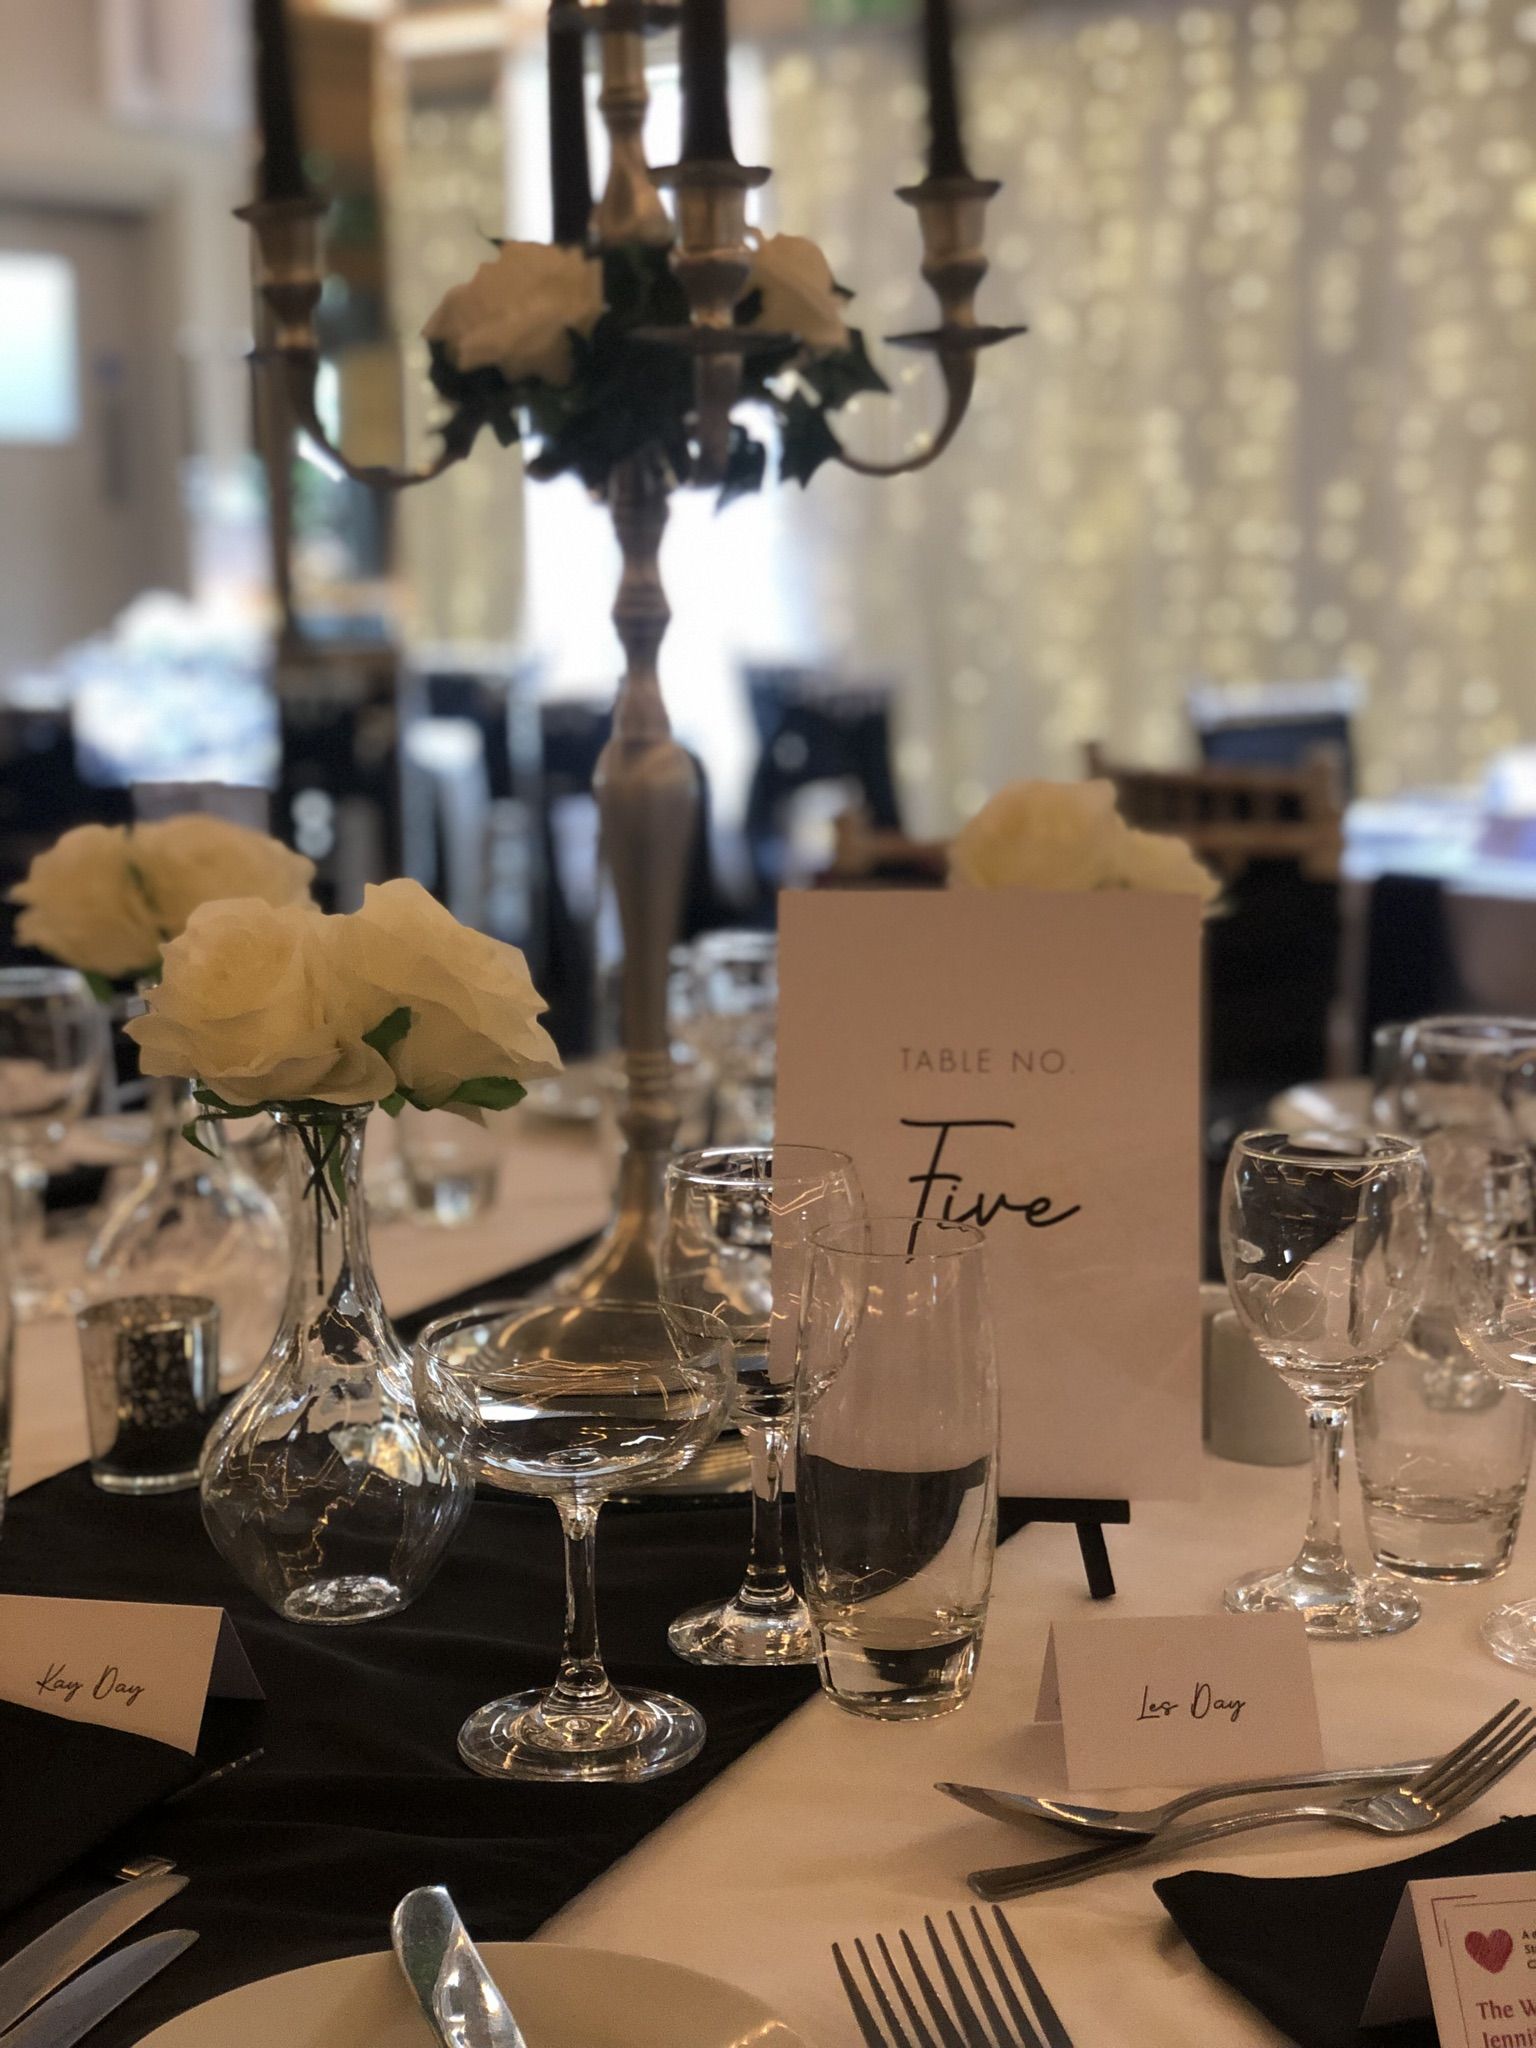 a table set with place cards and wine glasses.